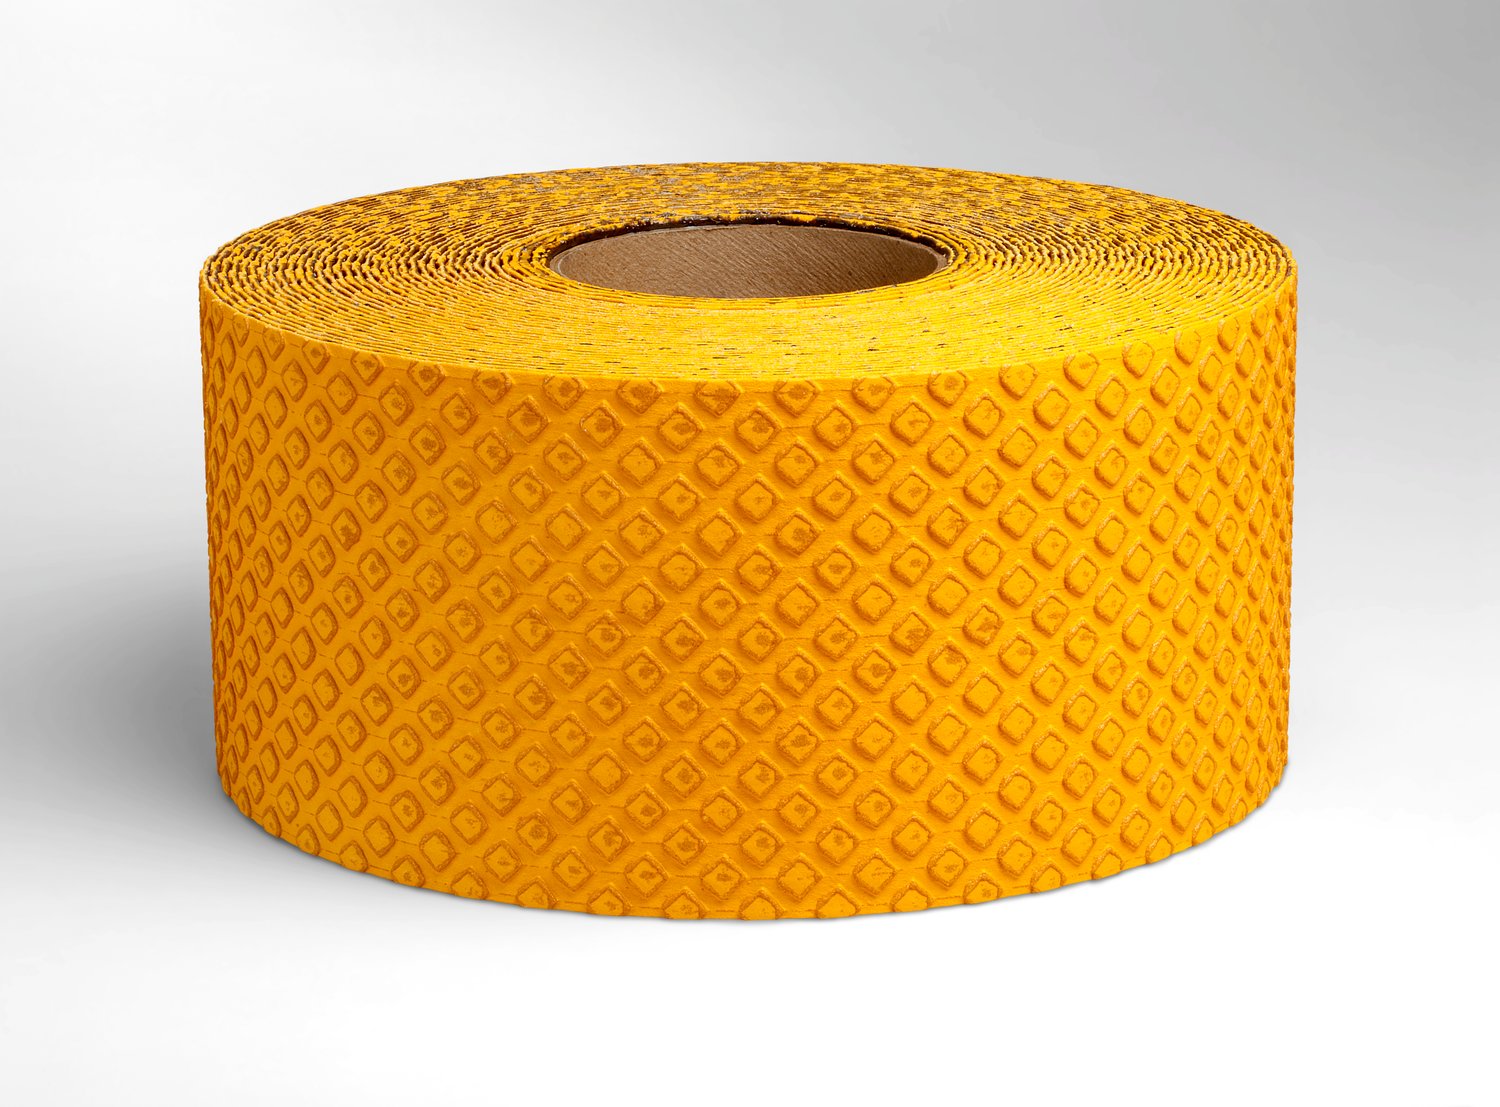 7100007476 - 3M Stamark High Performance Tape L381AW, Yellow, Linered, 24 in x 25 yd